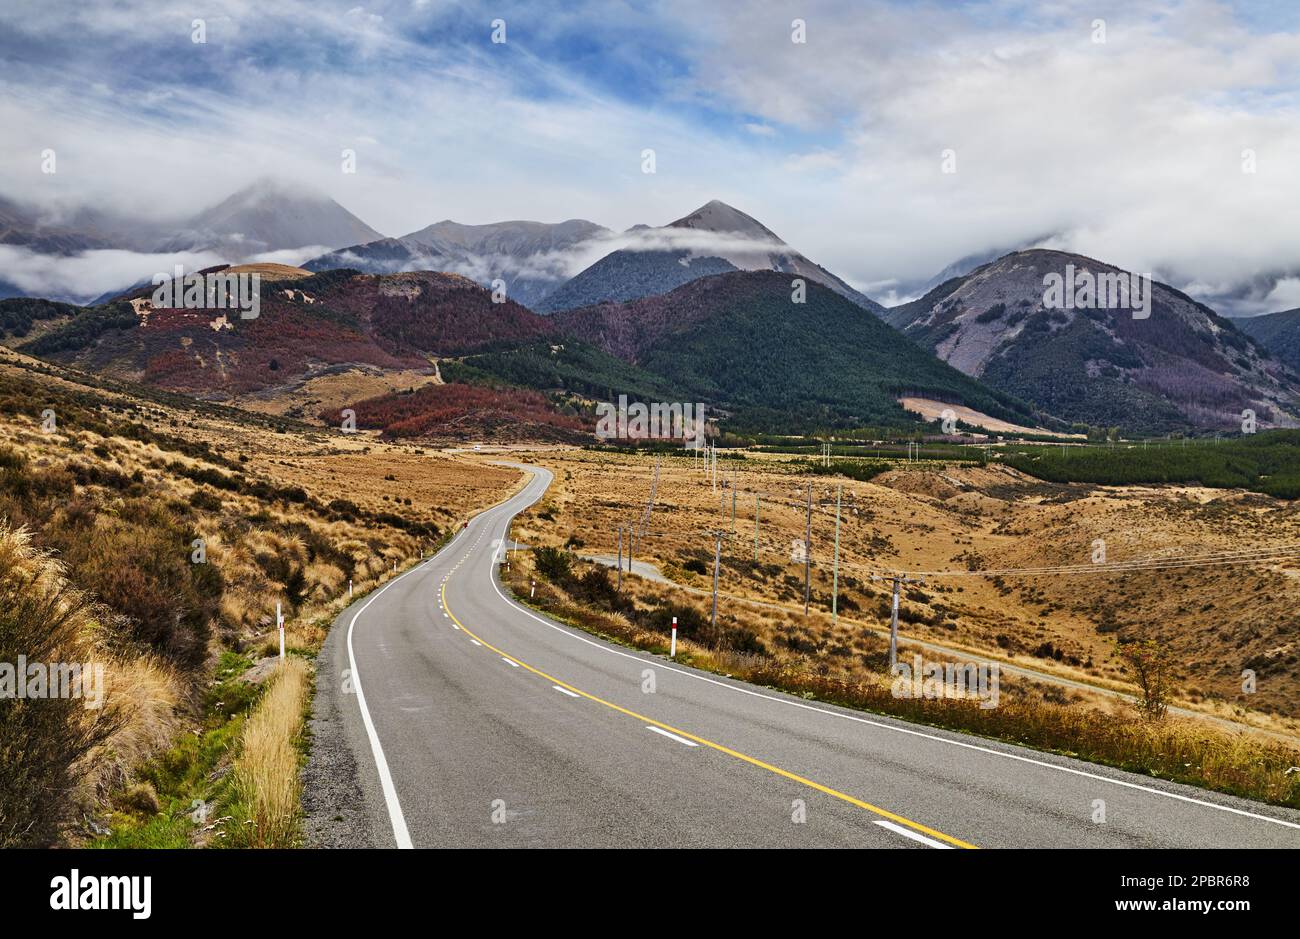 Mountain landscape with road and cloudy sky, Arthur's Pass, Southern Alps, New Zealand Stock Photo